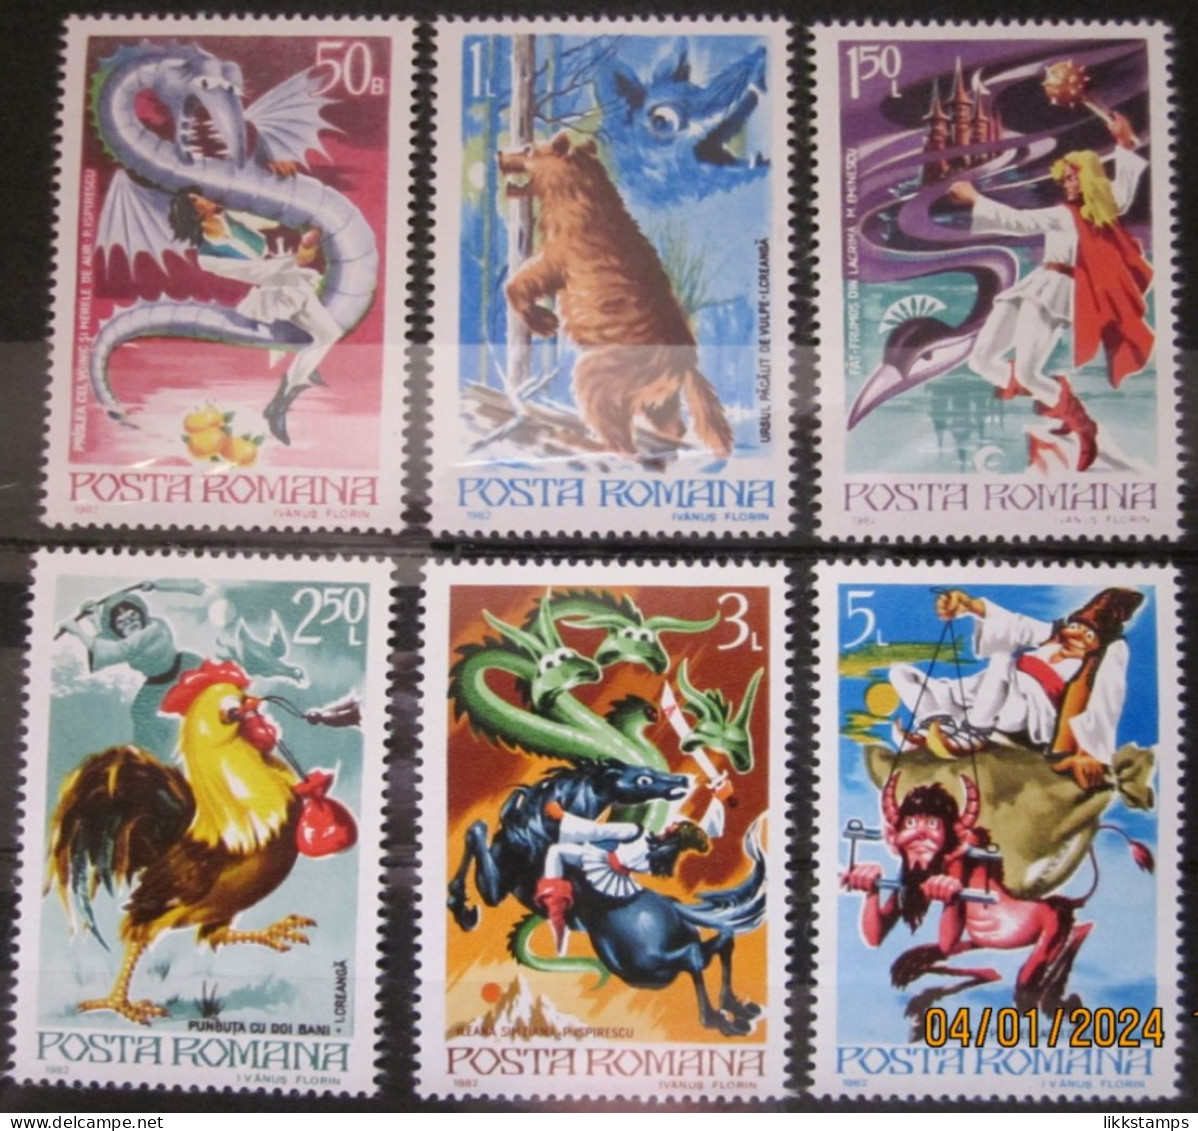 ROMANIA ~ 1982 ~ S.G. NUMBERS 4737 - 4742. ~ FAIRY TALES. ~ MNH #03548 - Unused Stamps